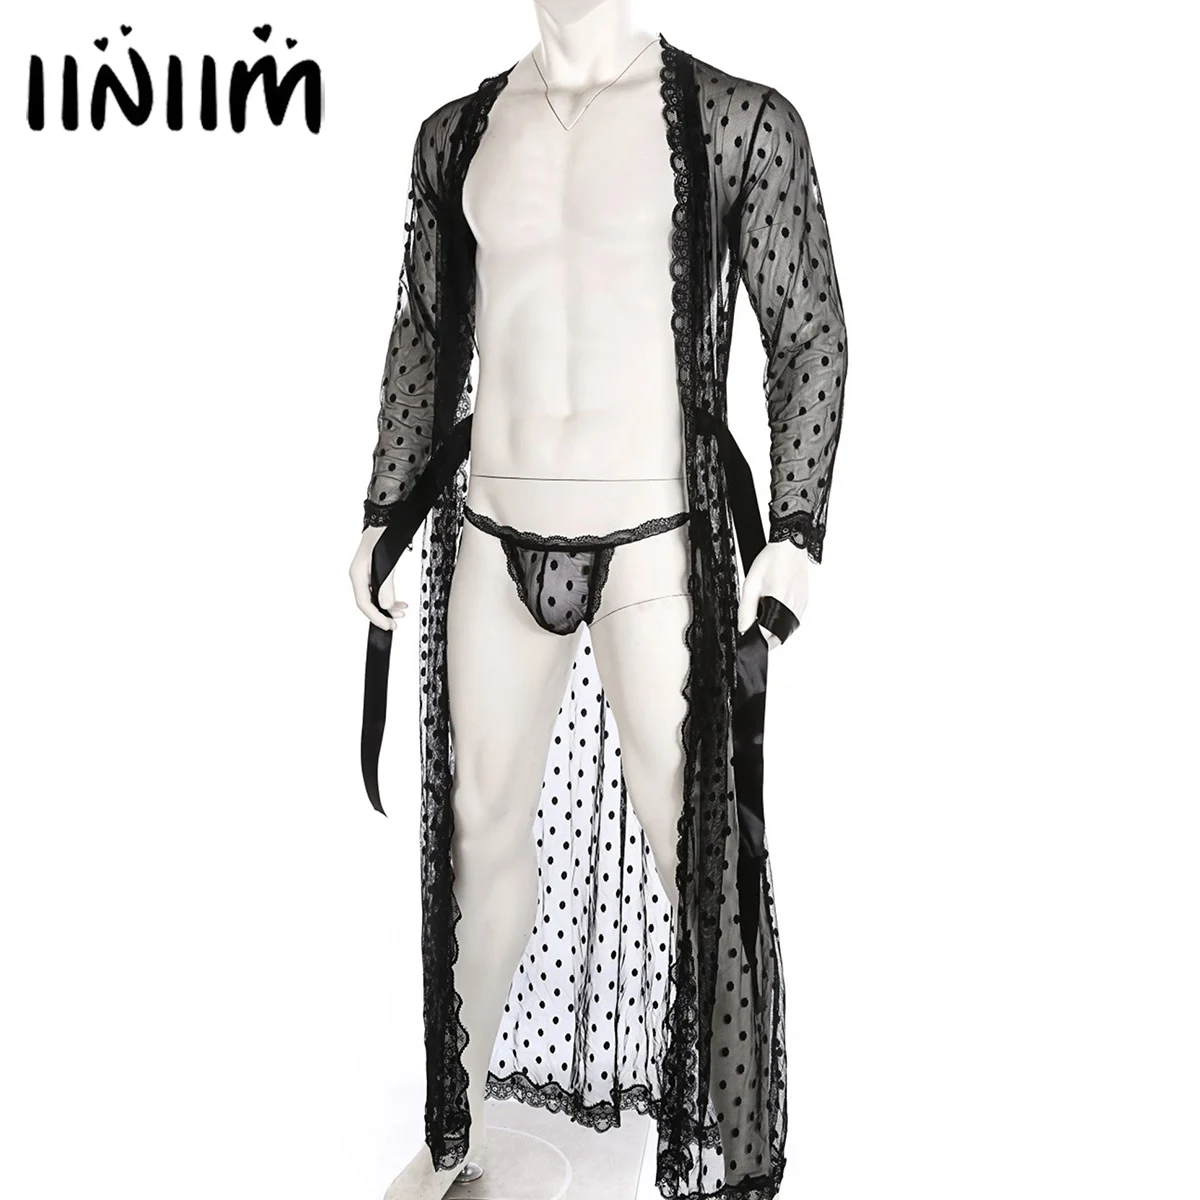 

Men Dot Exotic Lingerie Nightwear See-through Mesh Lace Trim Kimono Bathrobe Belted Night-Gown with Lace-up G-string Babydolls